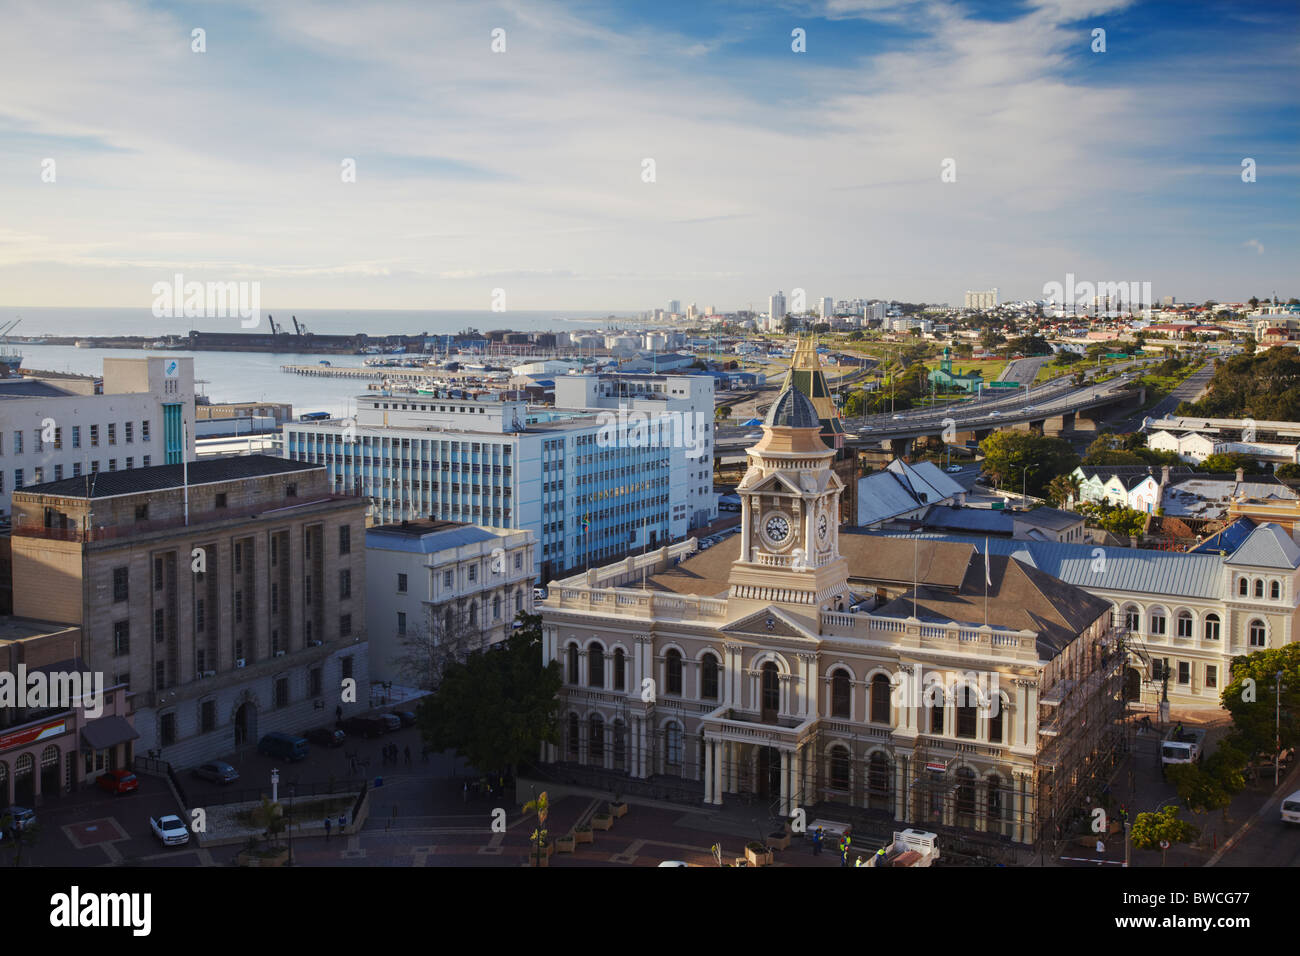 View of downtown Port Elizabeth, Eastern Cape, South Africa Stock Photo